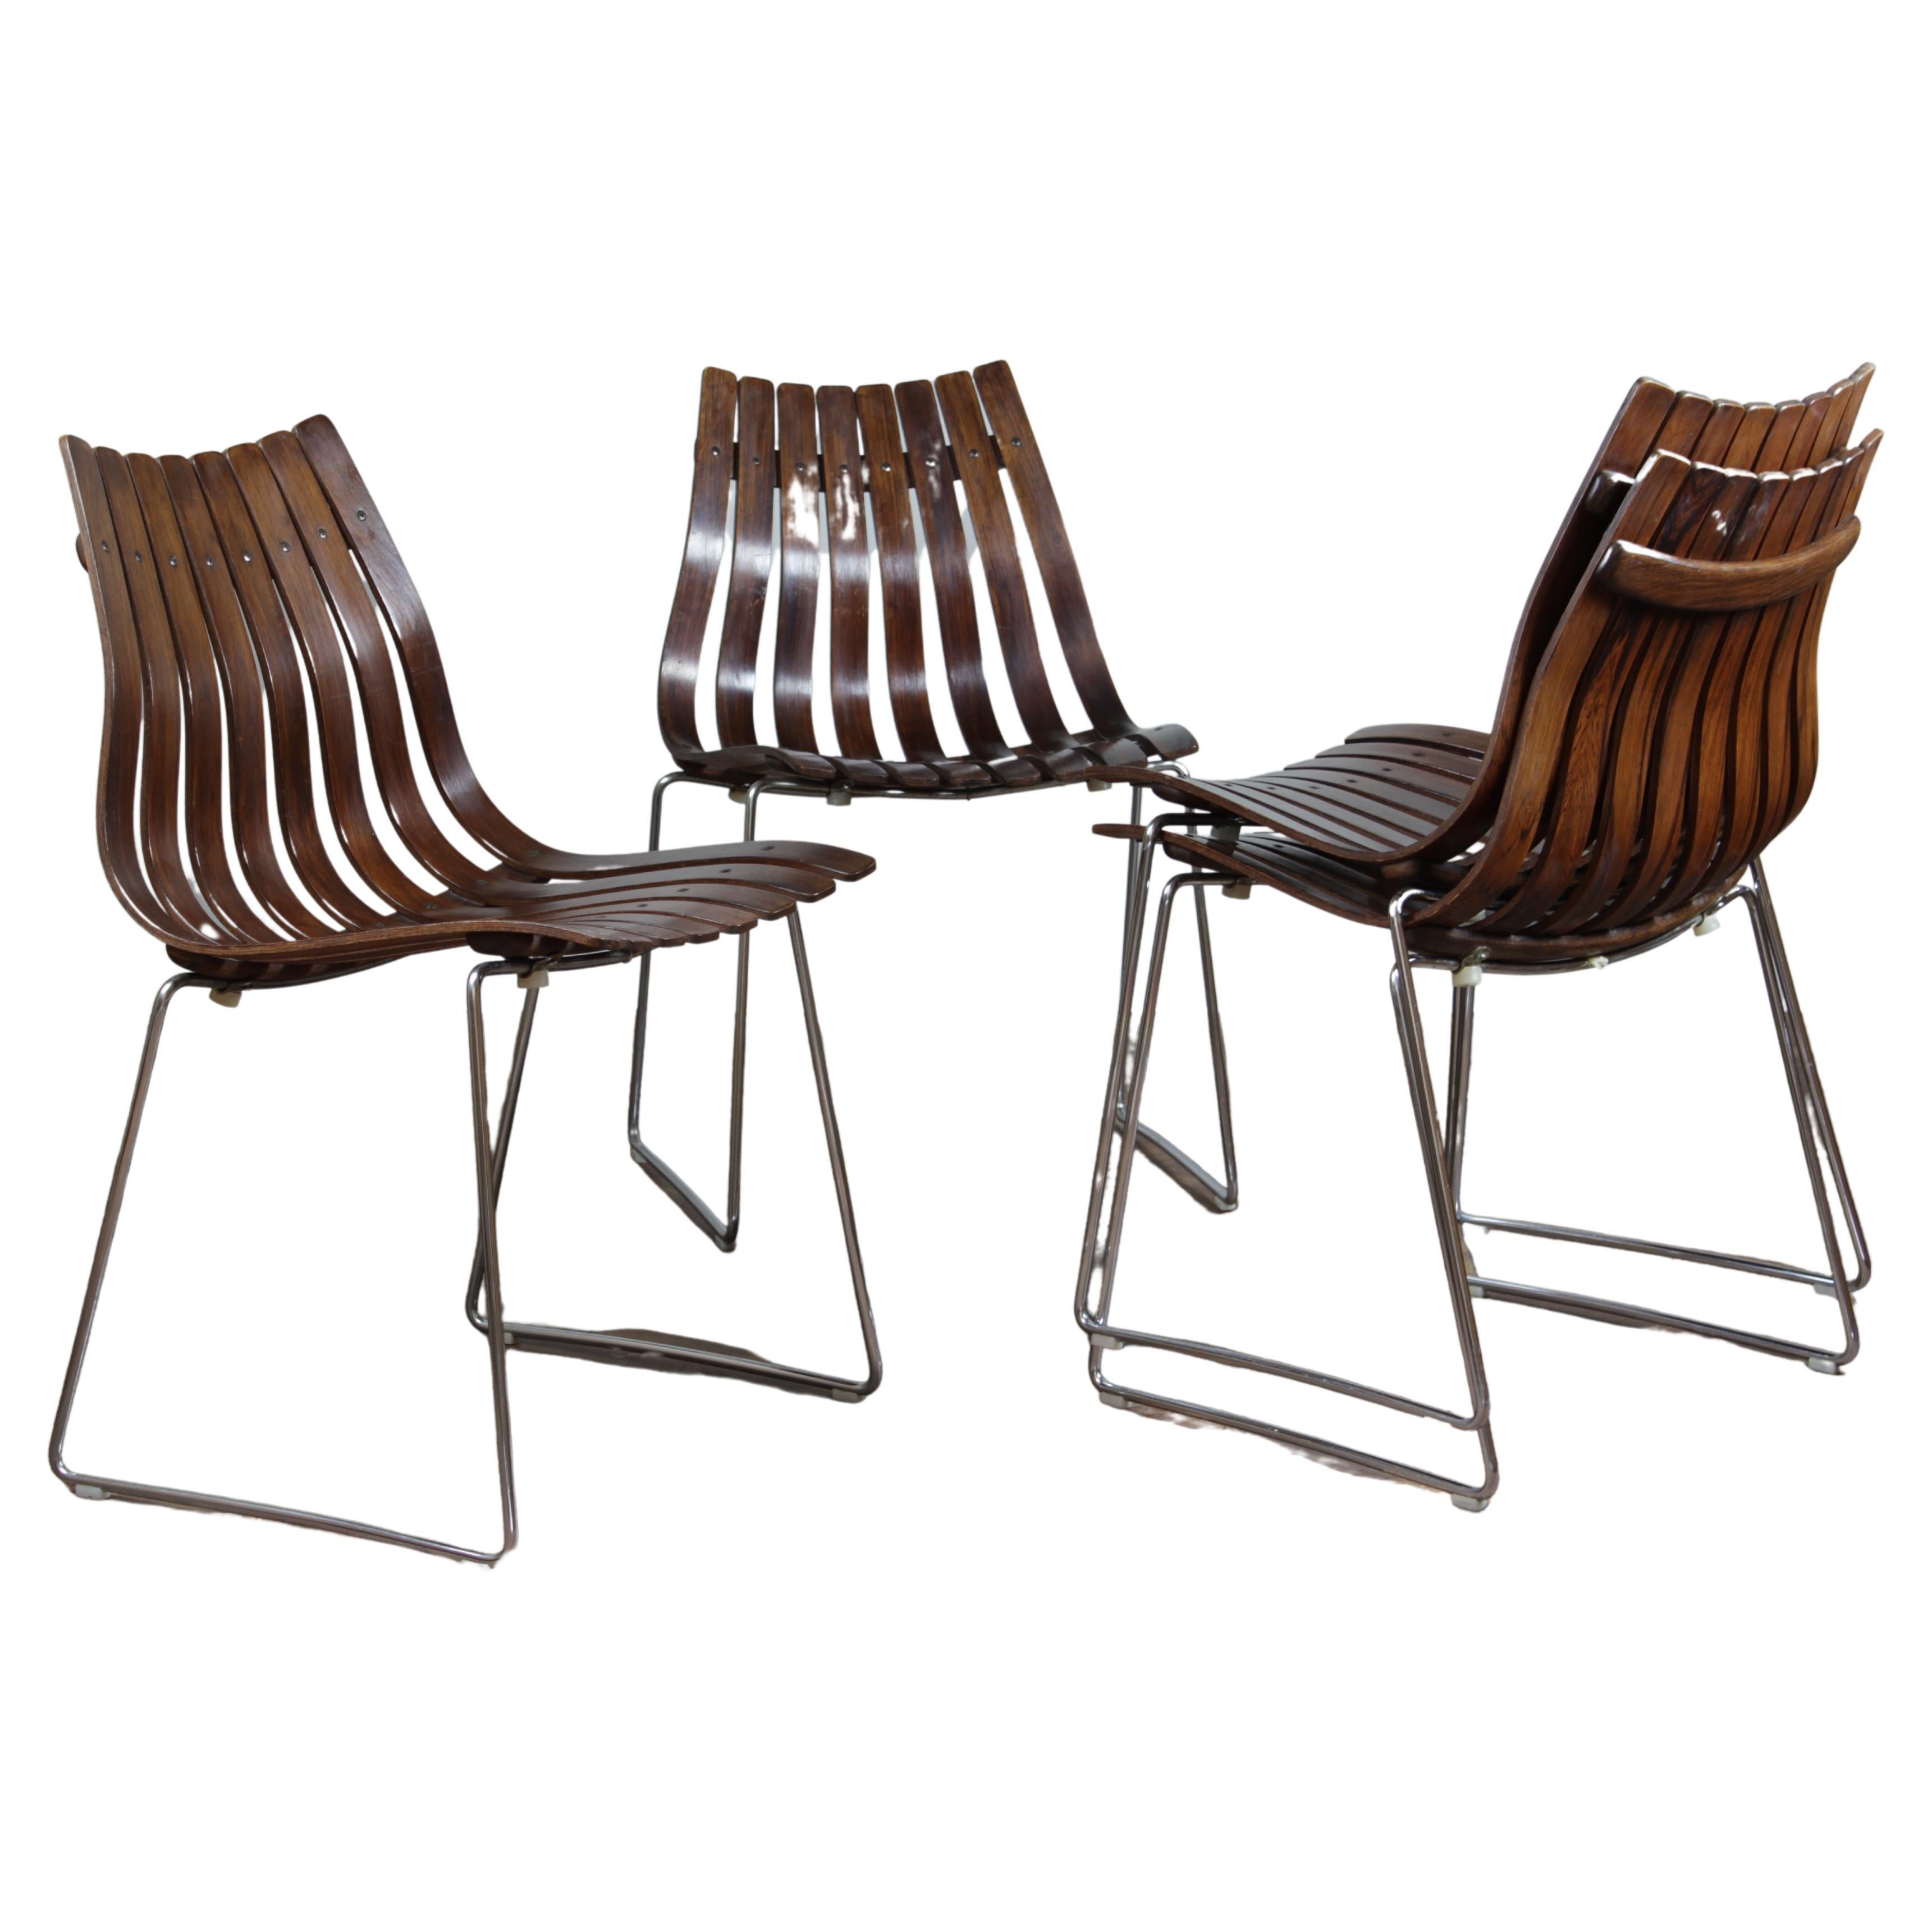 Set of Six Mid Century Modern Dining Chairs by Hans Brattrud for Hove Møbler